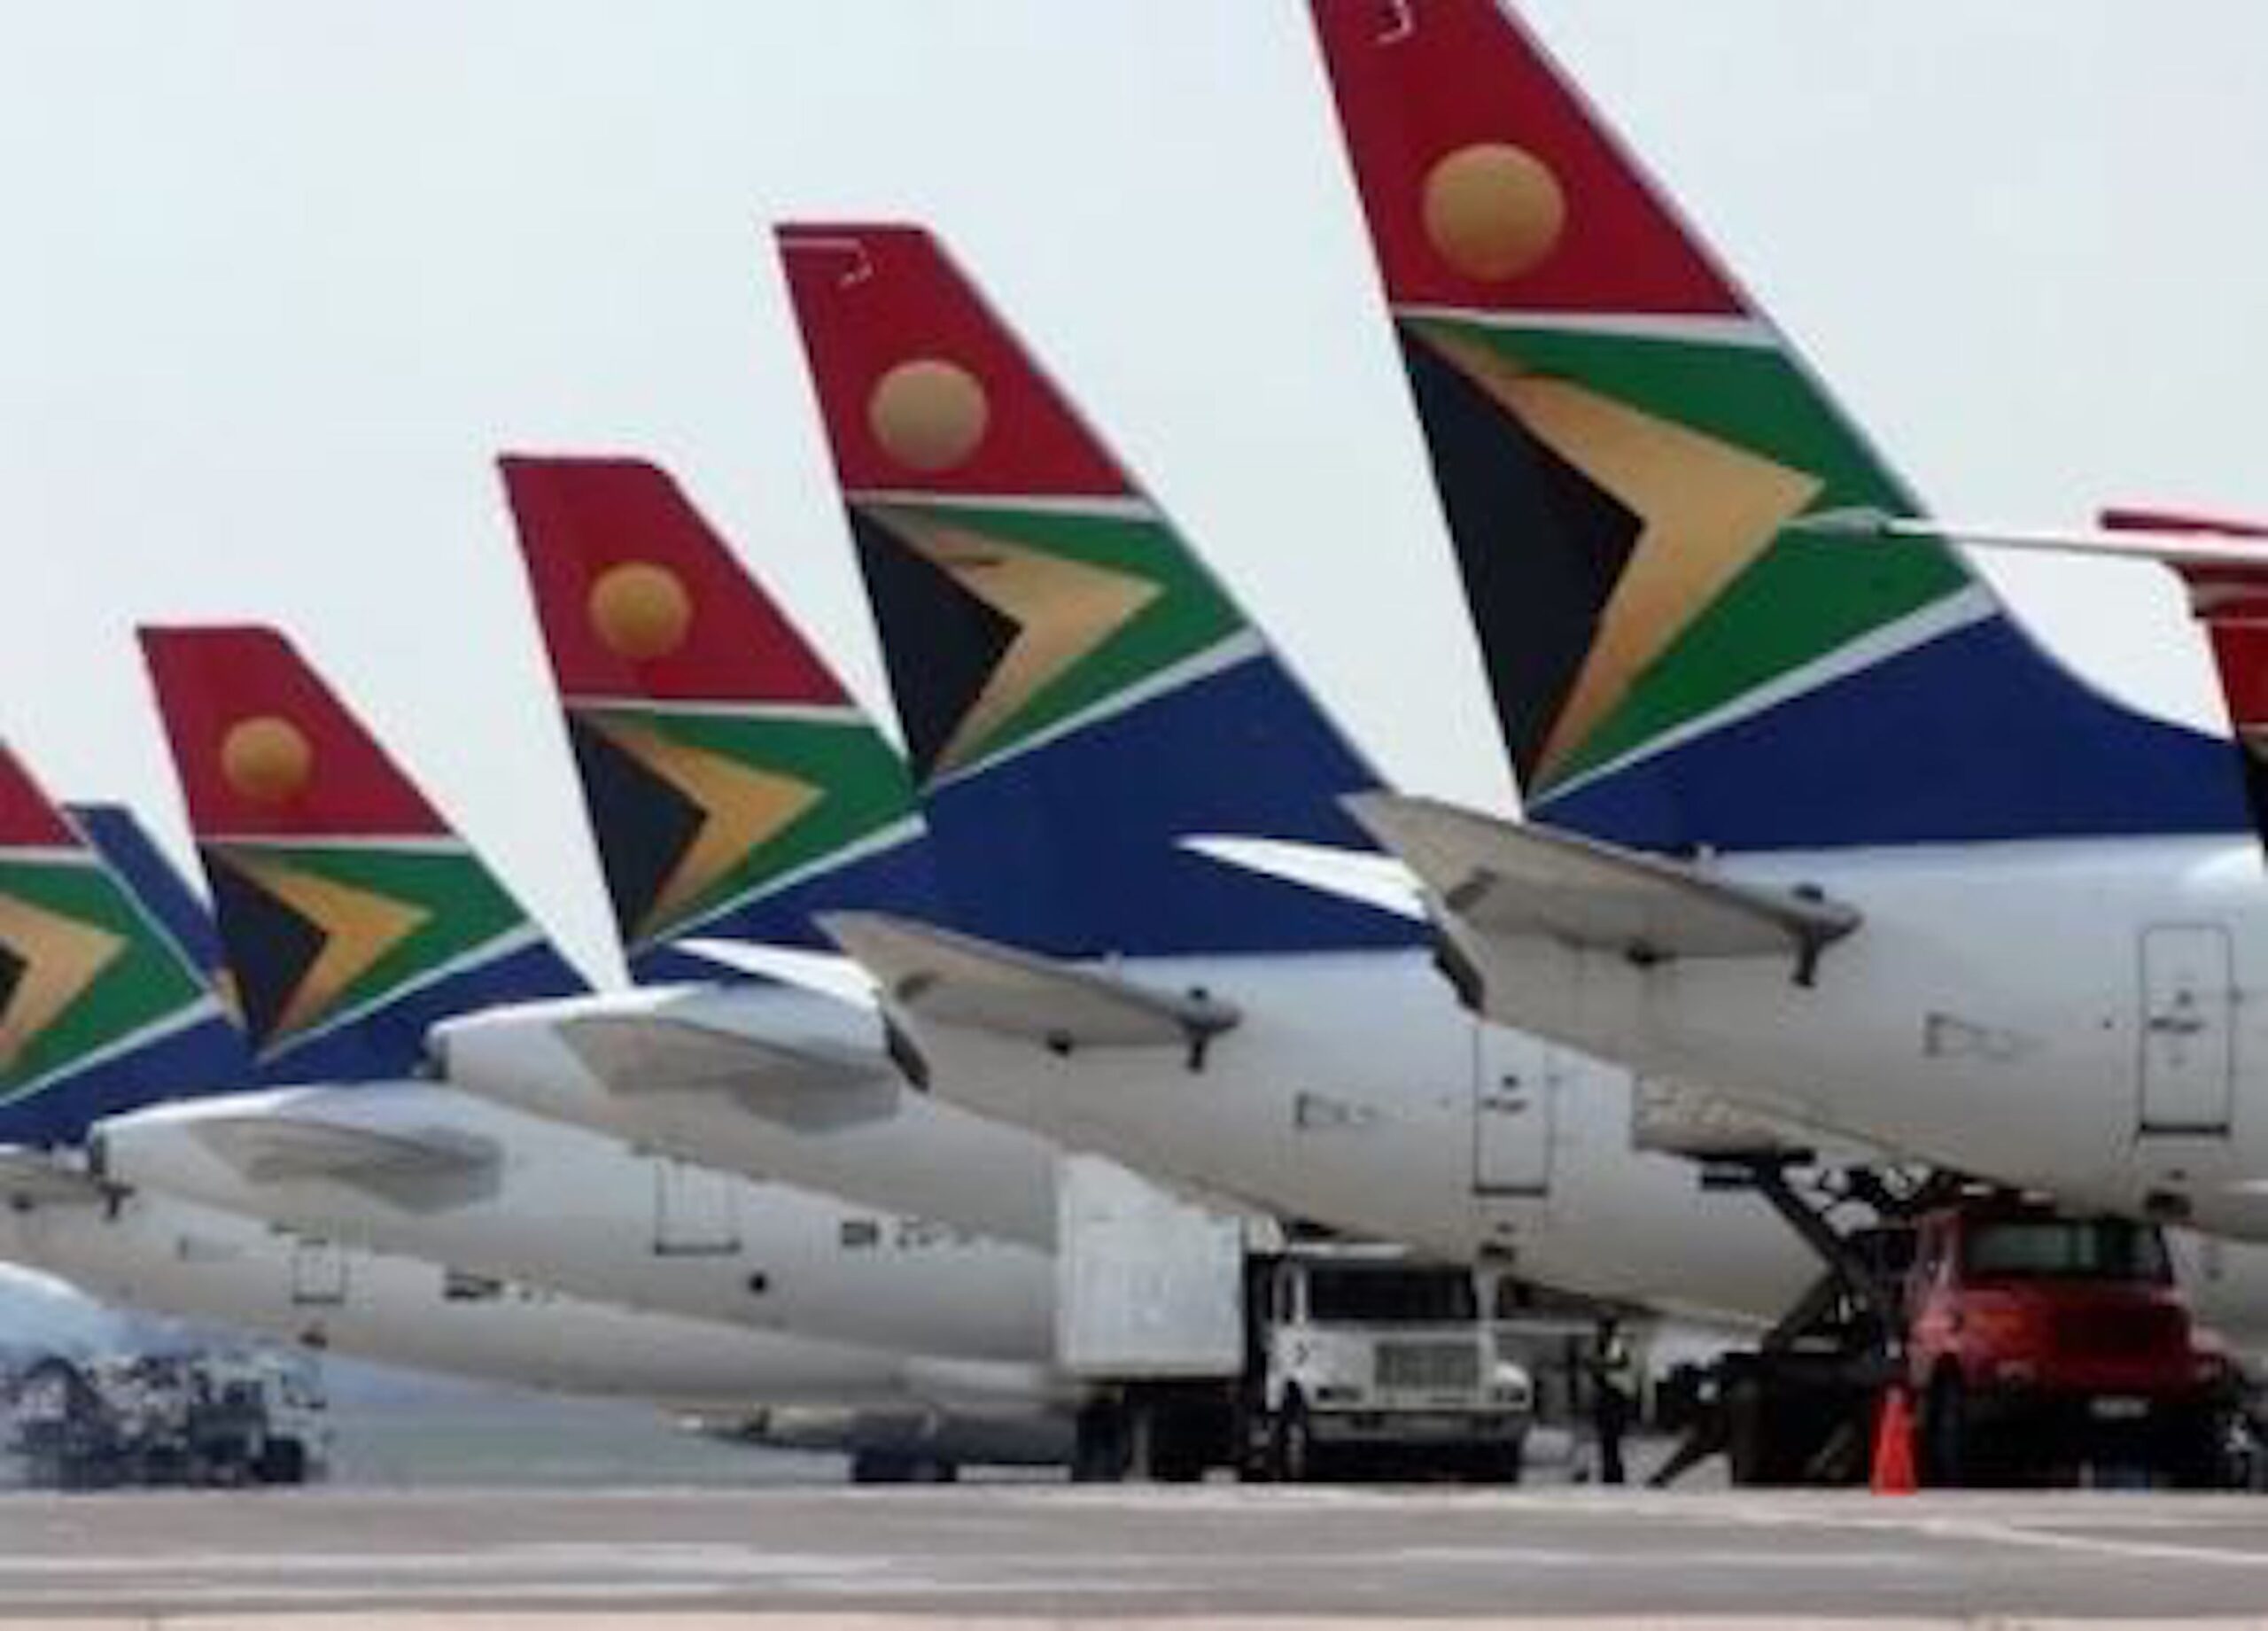 South African Airways: Celebrating two milestones this month